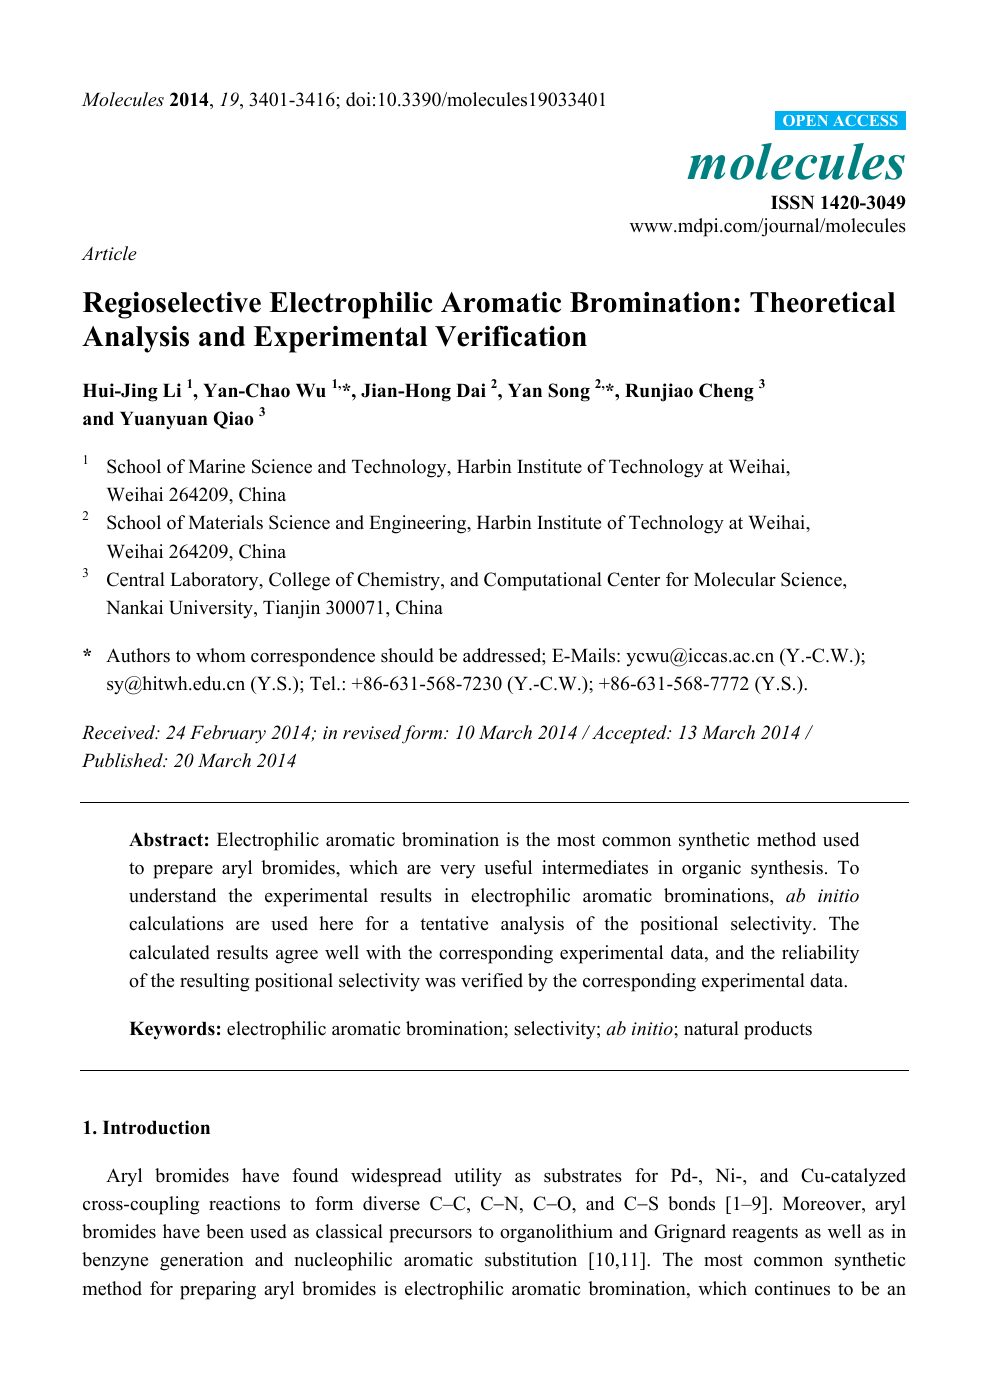 Regioselective Electrophilic Aromatic Bromination Theoretical Analysis And Experimental Verification Topic Of Research Paper In Chemical Sciences Download Scholarly Article Pdf And Read For Free On Cyberleninka Open Science Hub